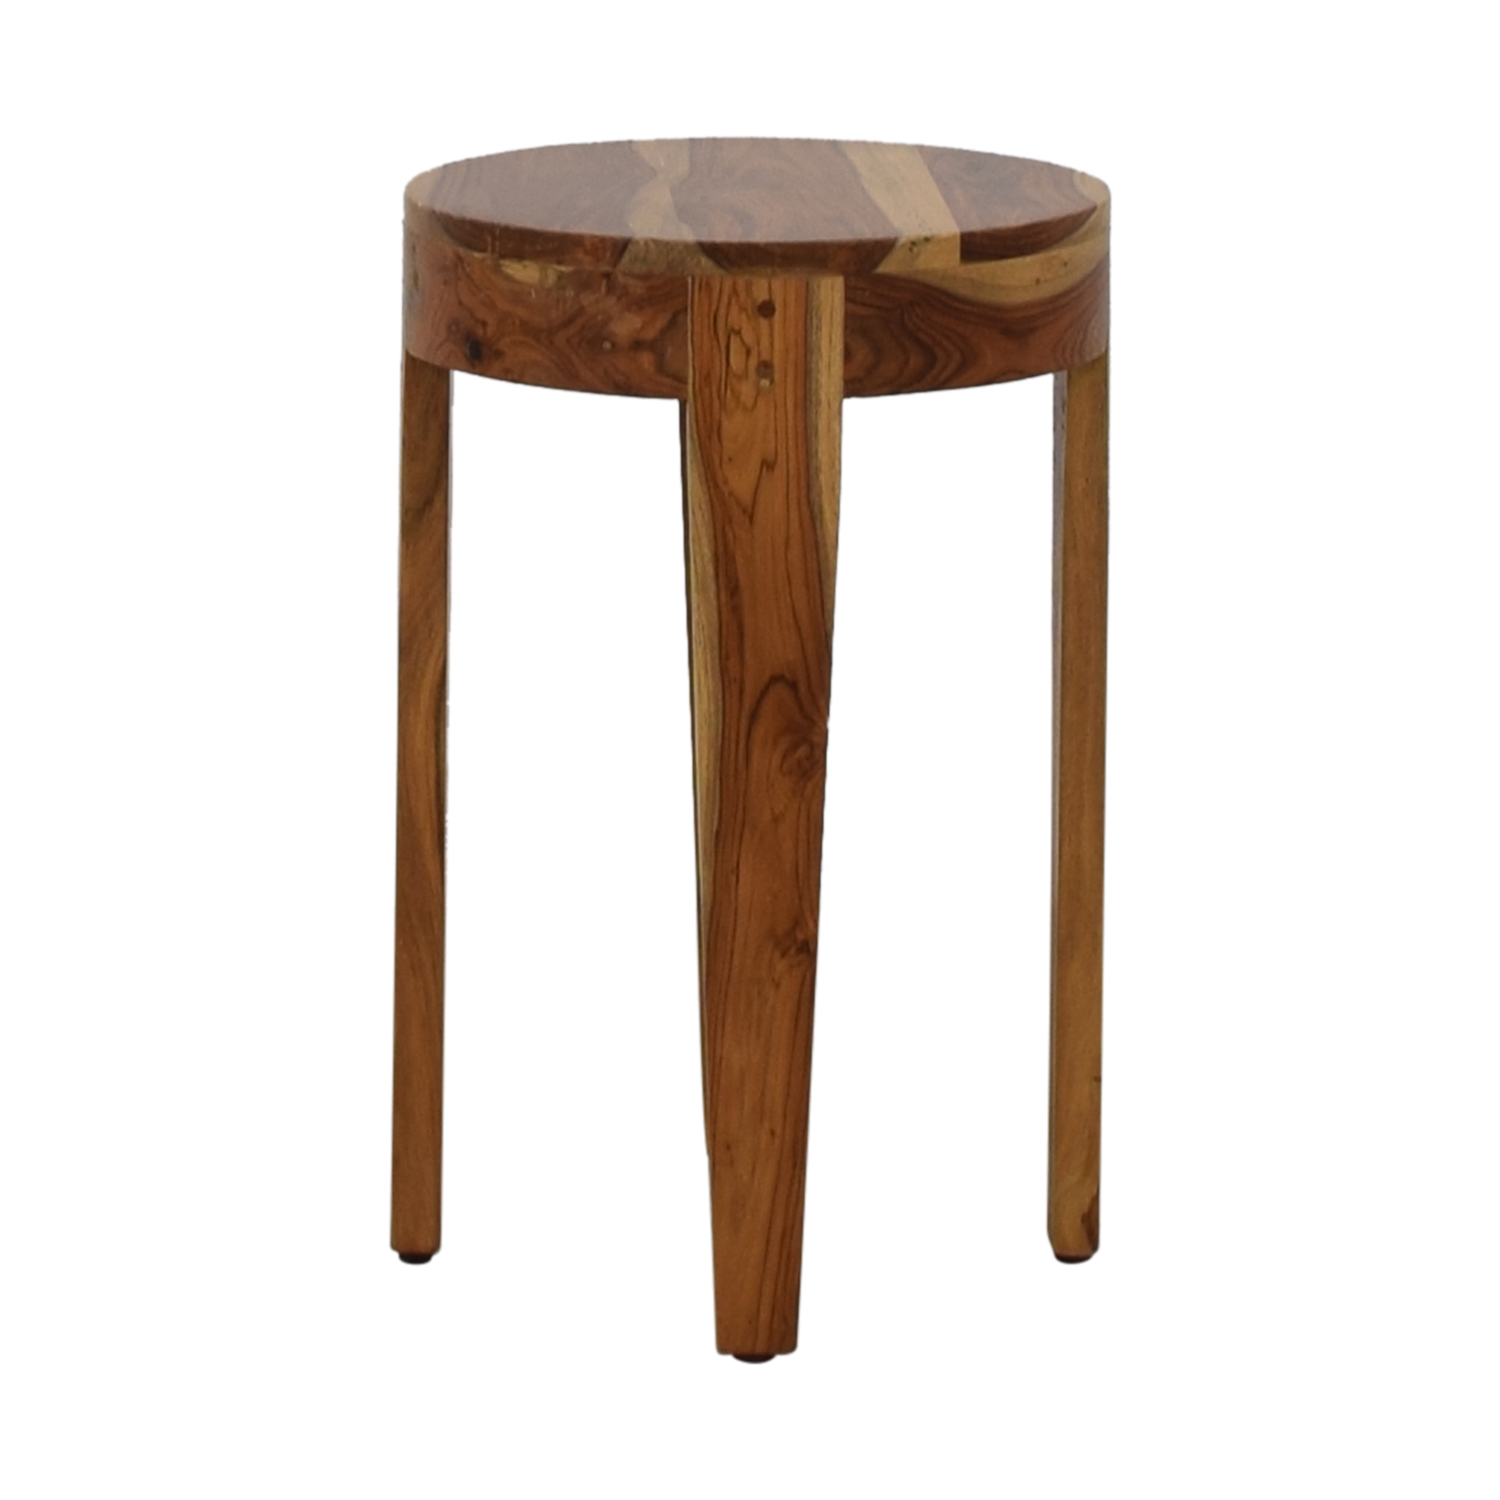 off target small round accent table tables second hand metal bedroom side oval brown lamp drinking glass sets outdoor patio furniture covers rustic elm coffee carpet trim kohls